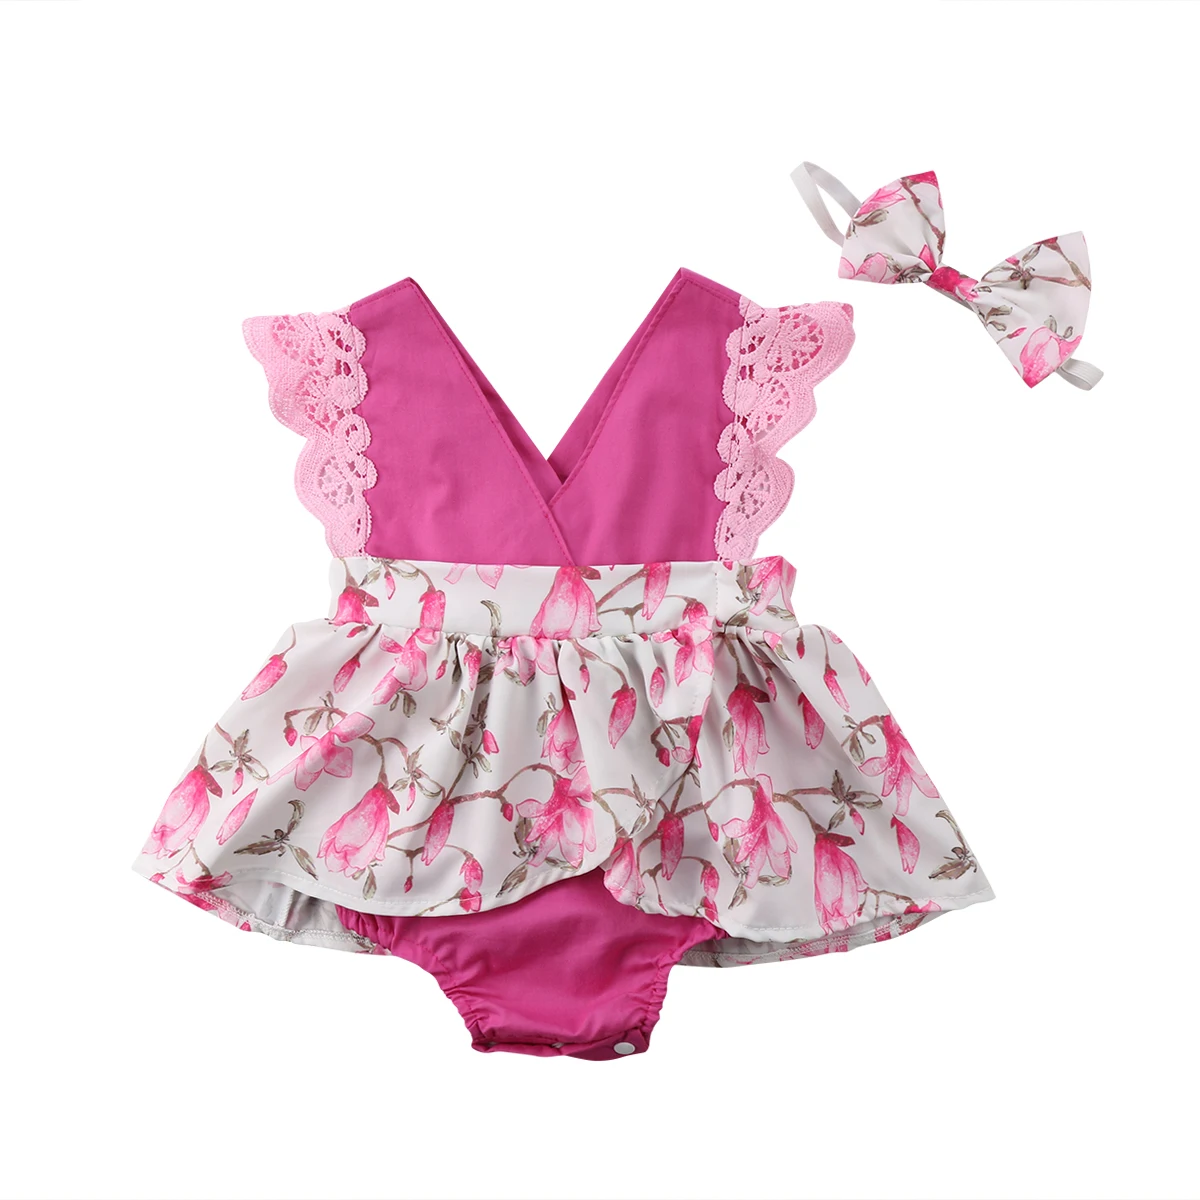 Family Matching Outfits Newborn Baby Girl Lace Romper Dress Outfit ...